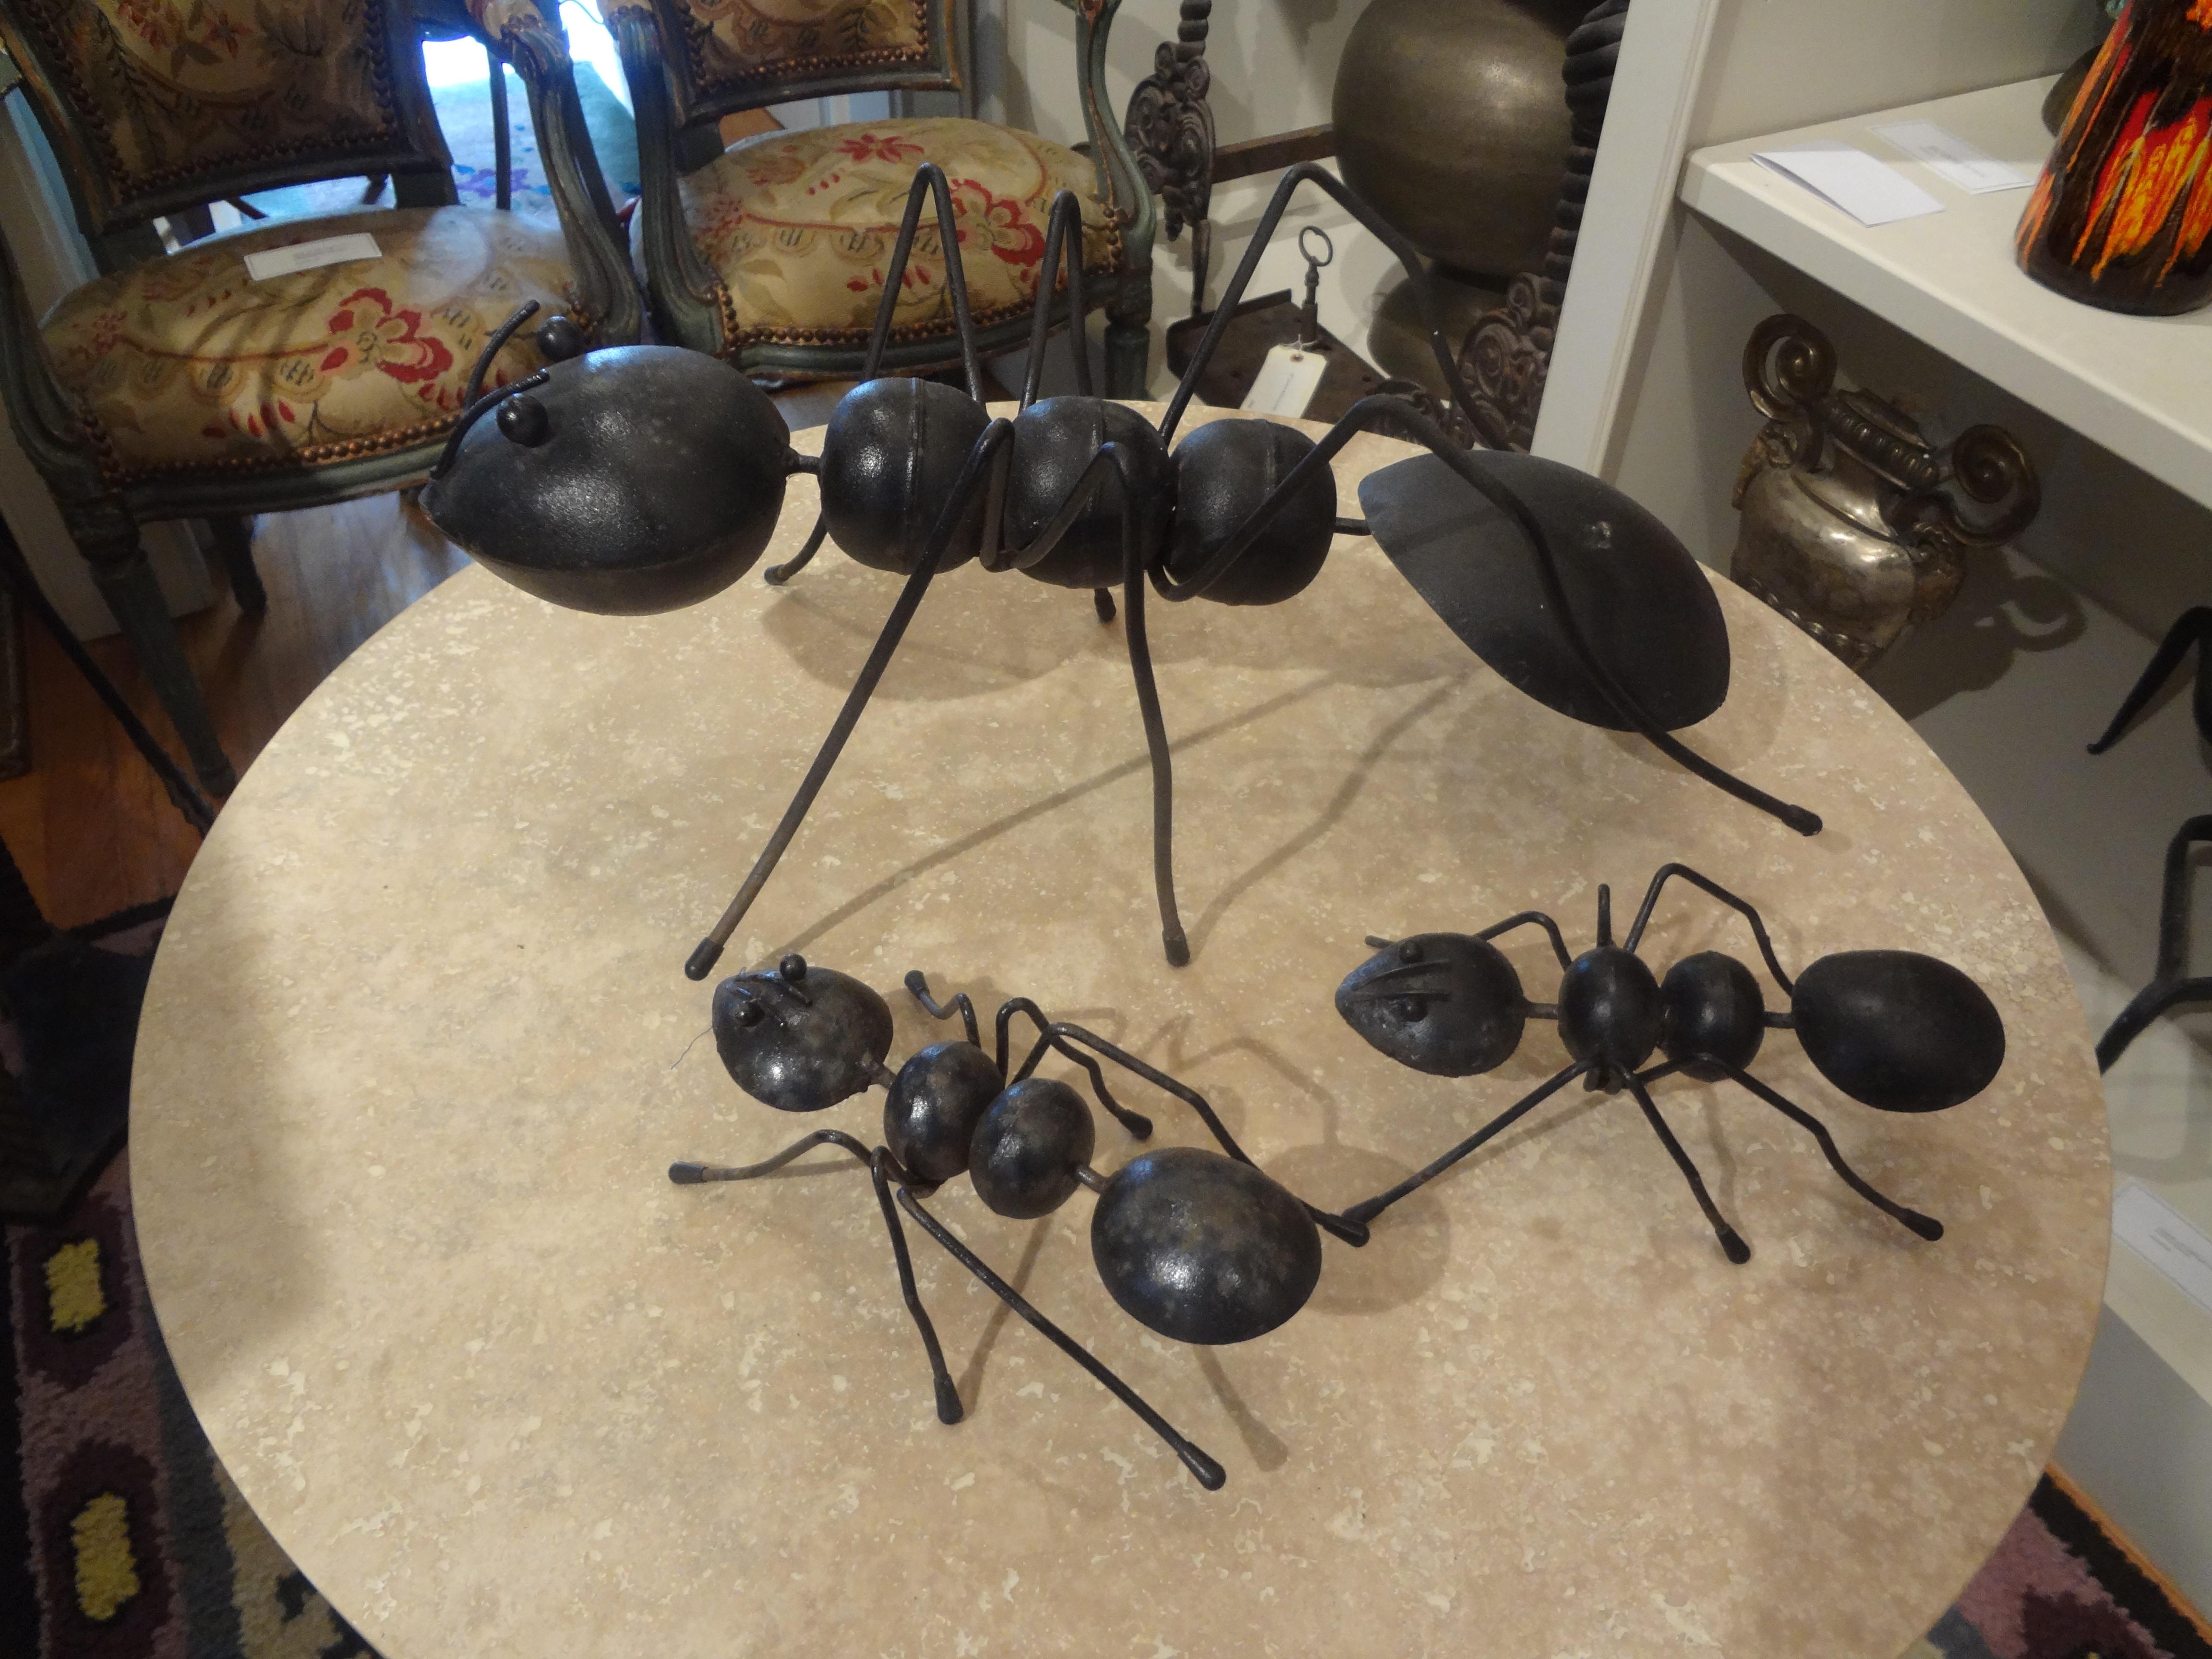 Set of vintage Brutalist decorative iron ants. This whimsical group of three iron ants make great accessories for a coffee table, console table, commode or credenza. Interesting and unusual!
Measures: Large ant:
6.13 inches H
15.75 inches L
8.25